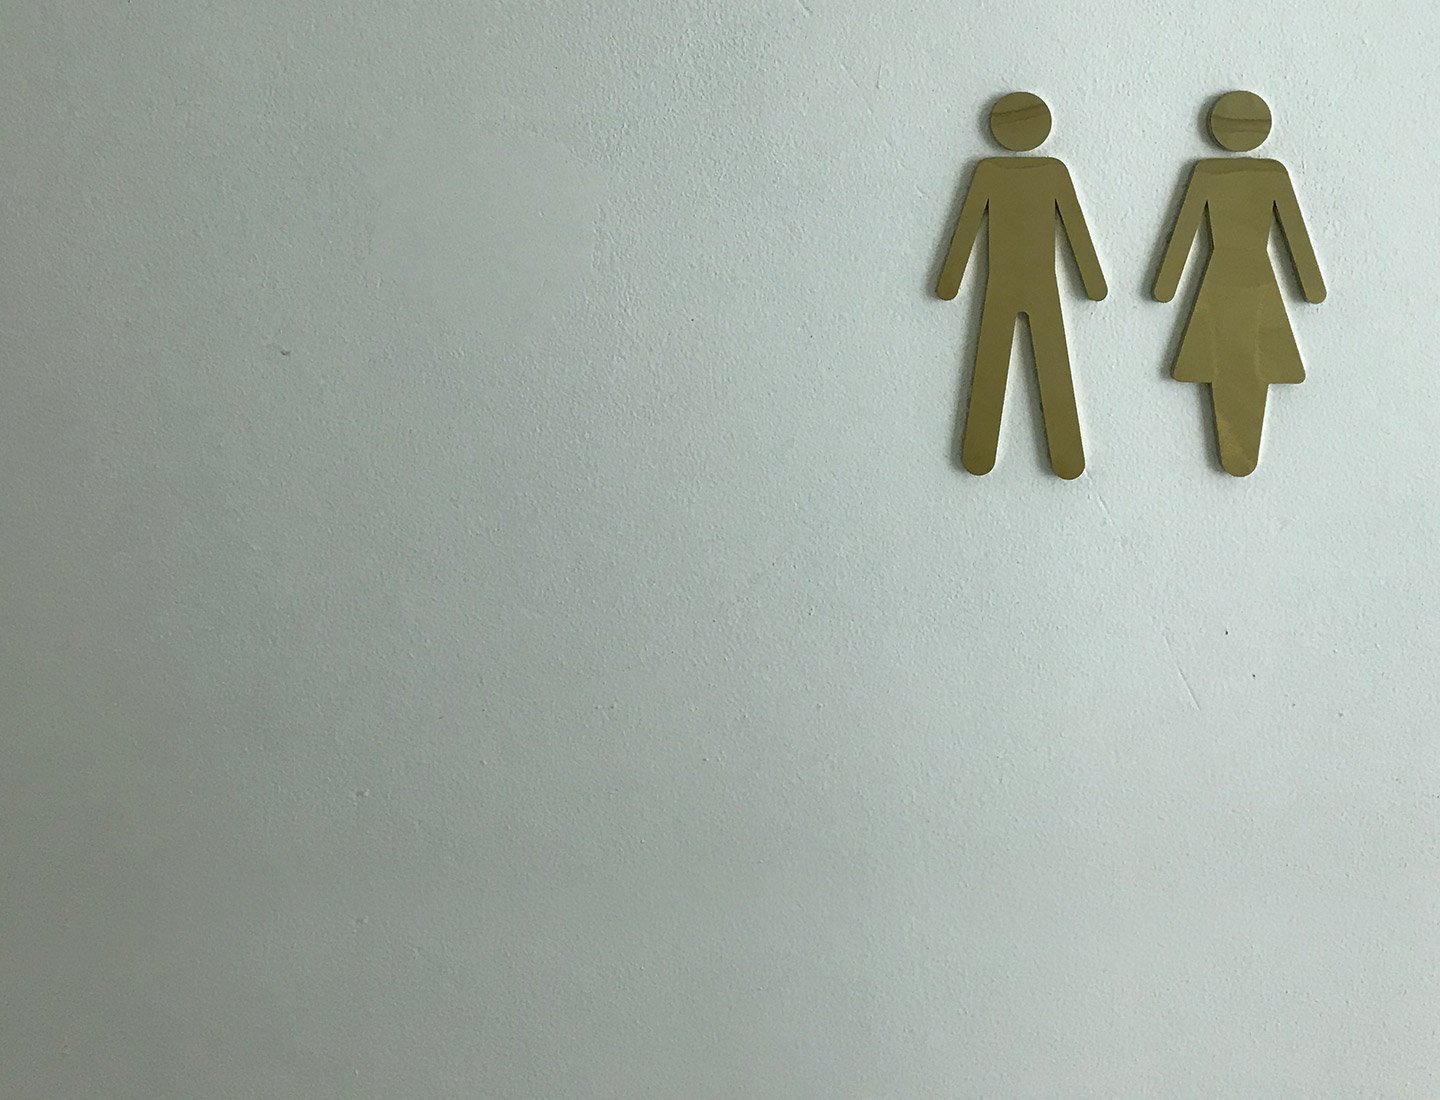 Man and woman symbol on the door of a public toilet.